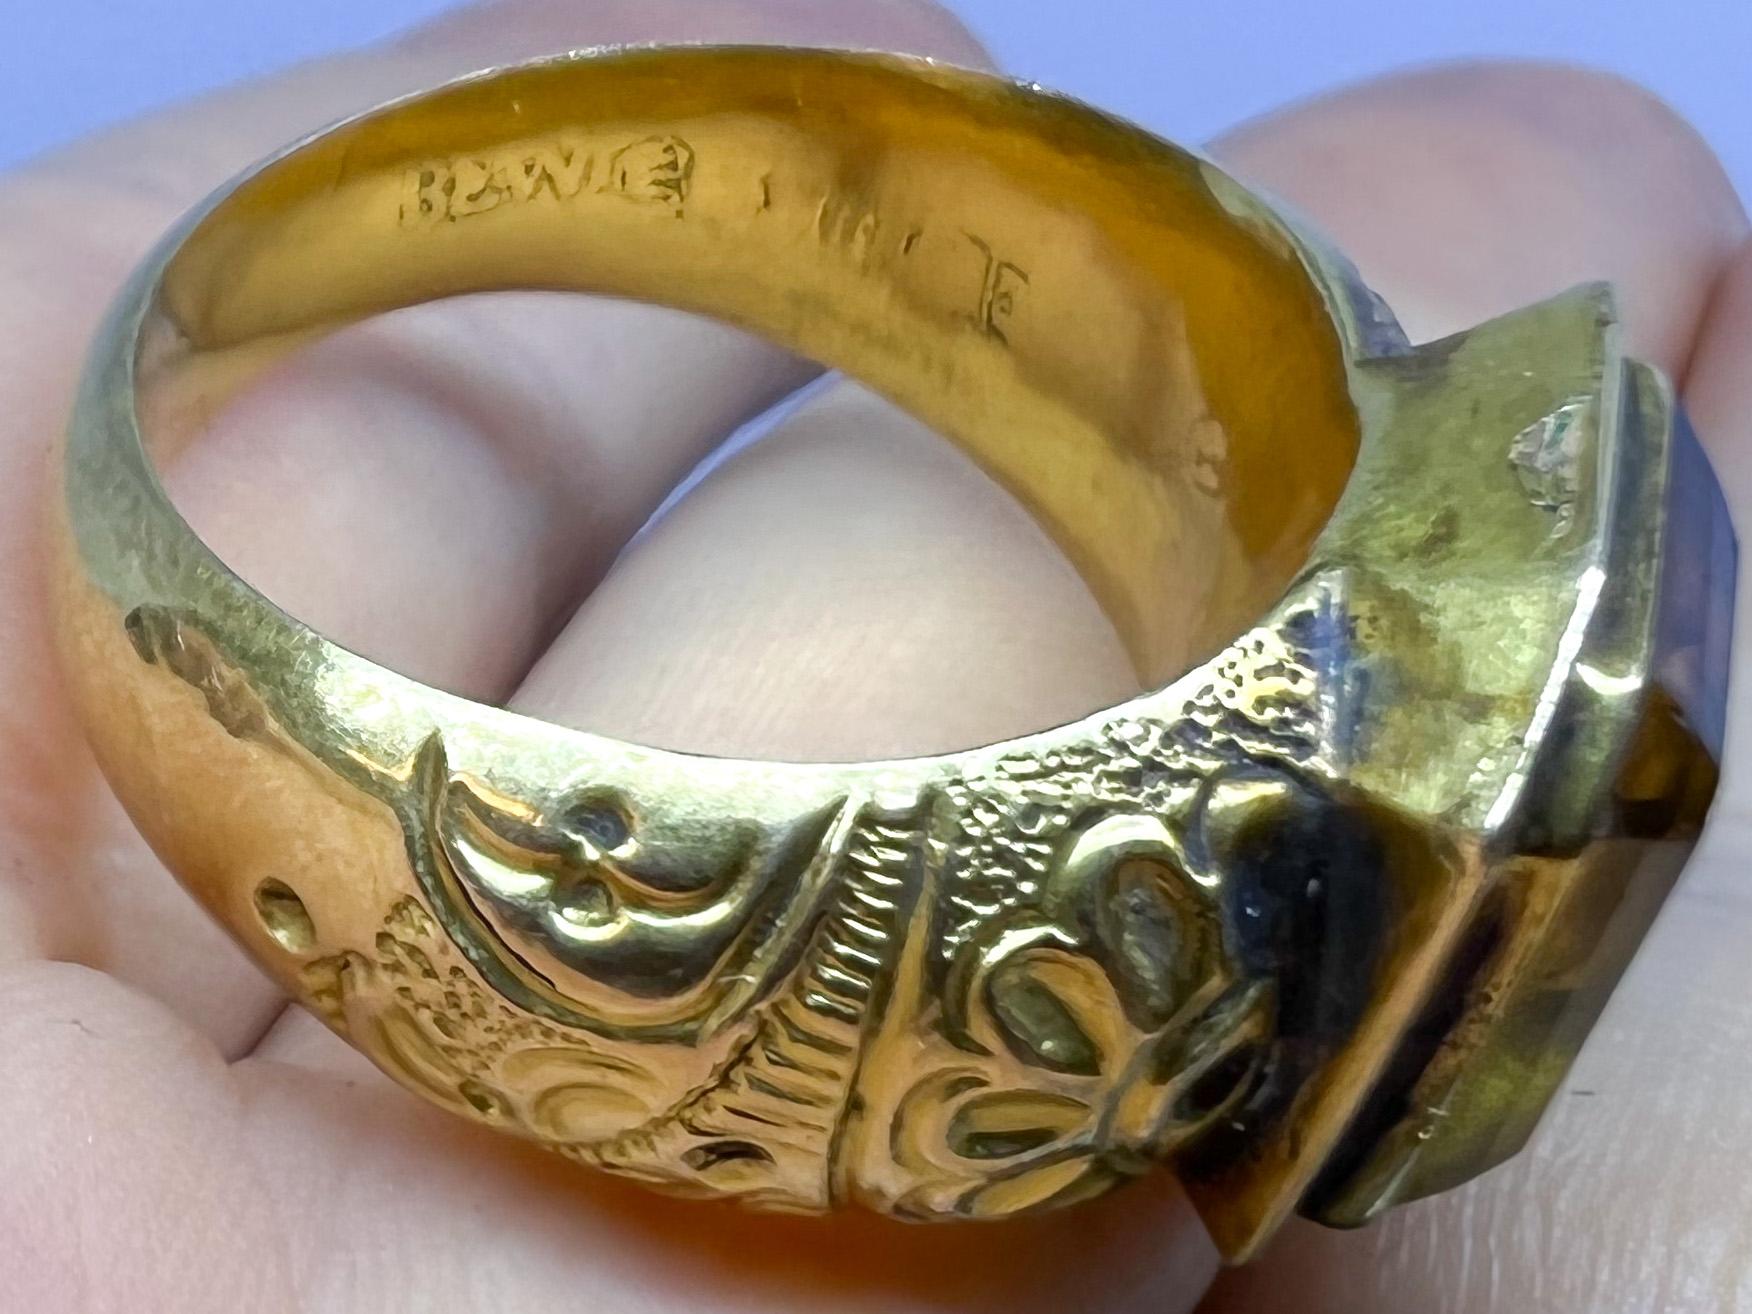 Early Victorian Antique Gold Ring 1855-1877 Tampere Finland For Sale